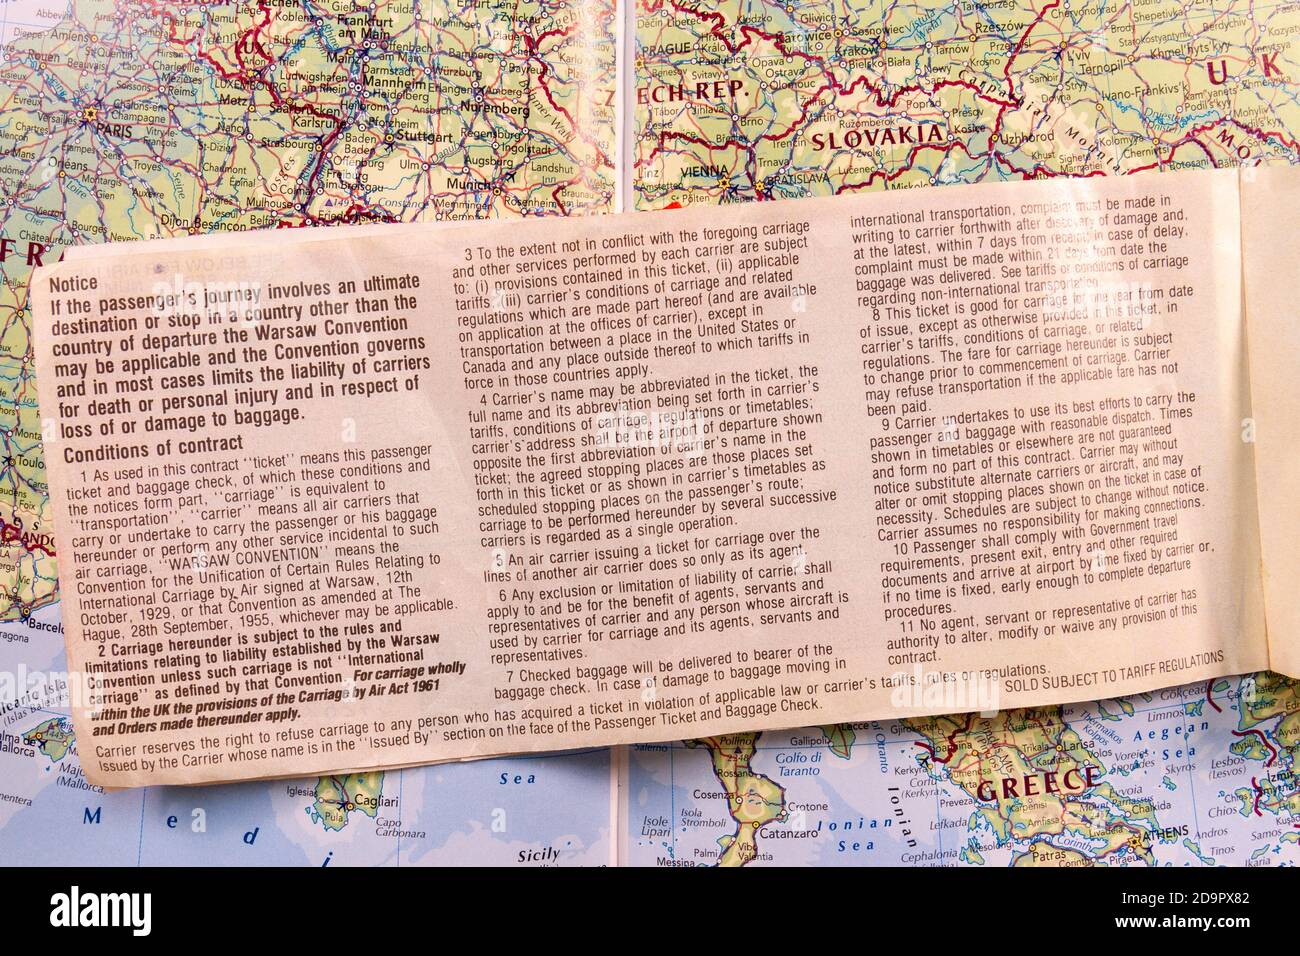 Inside page showing the Warsaw Convention information of a plane ticket from 1989 (for flights between the UK and Canada) on a map of Europe. Stock Photo